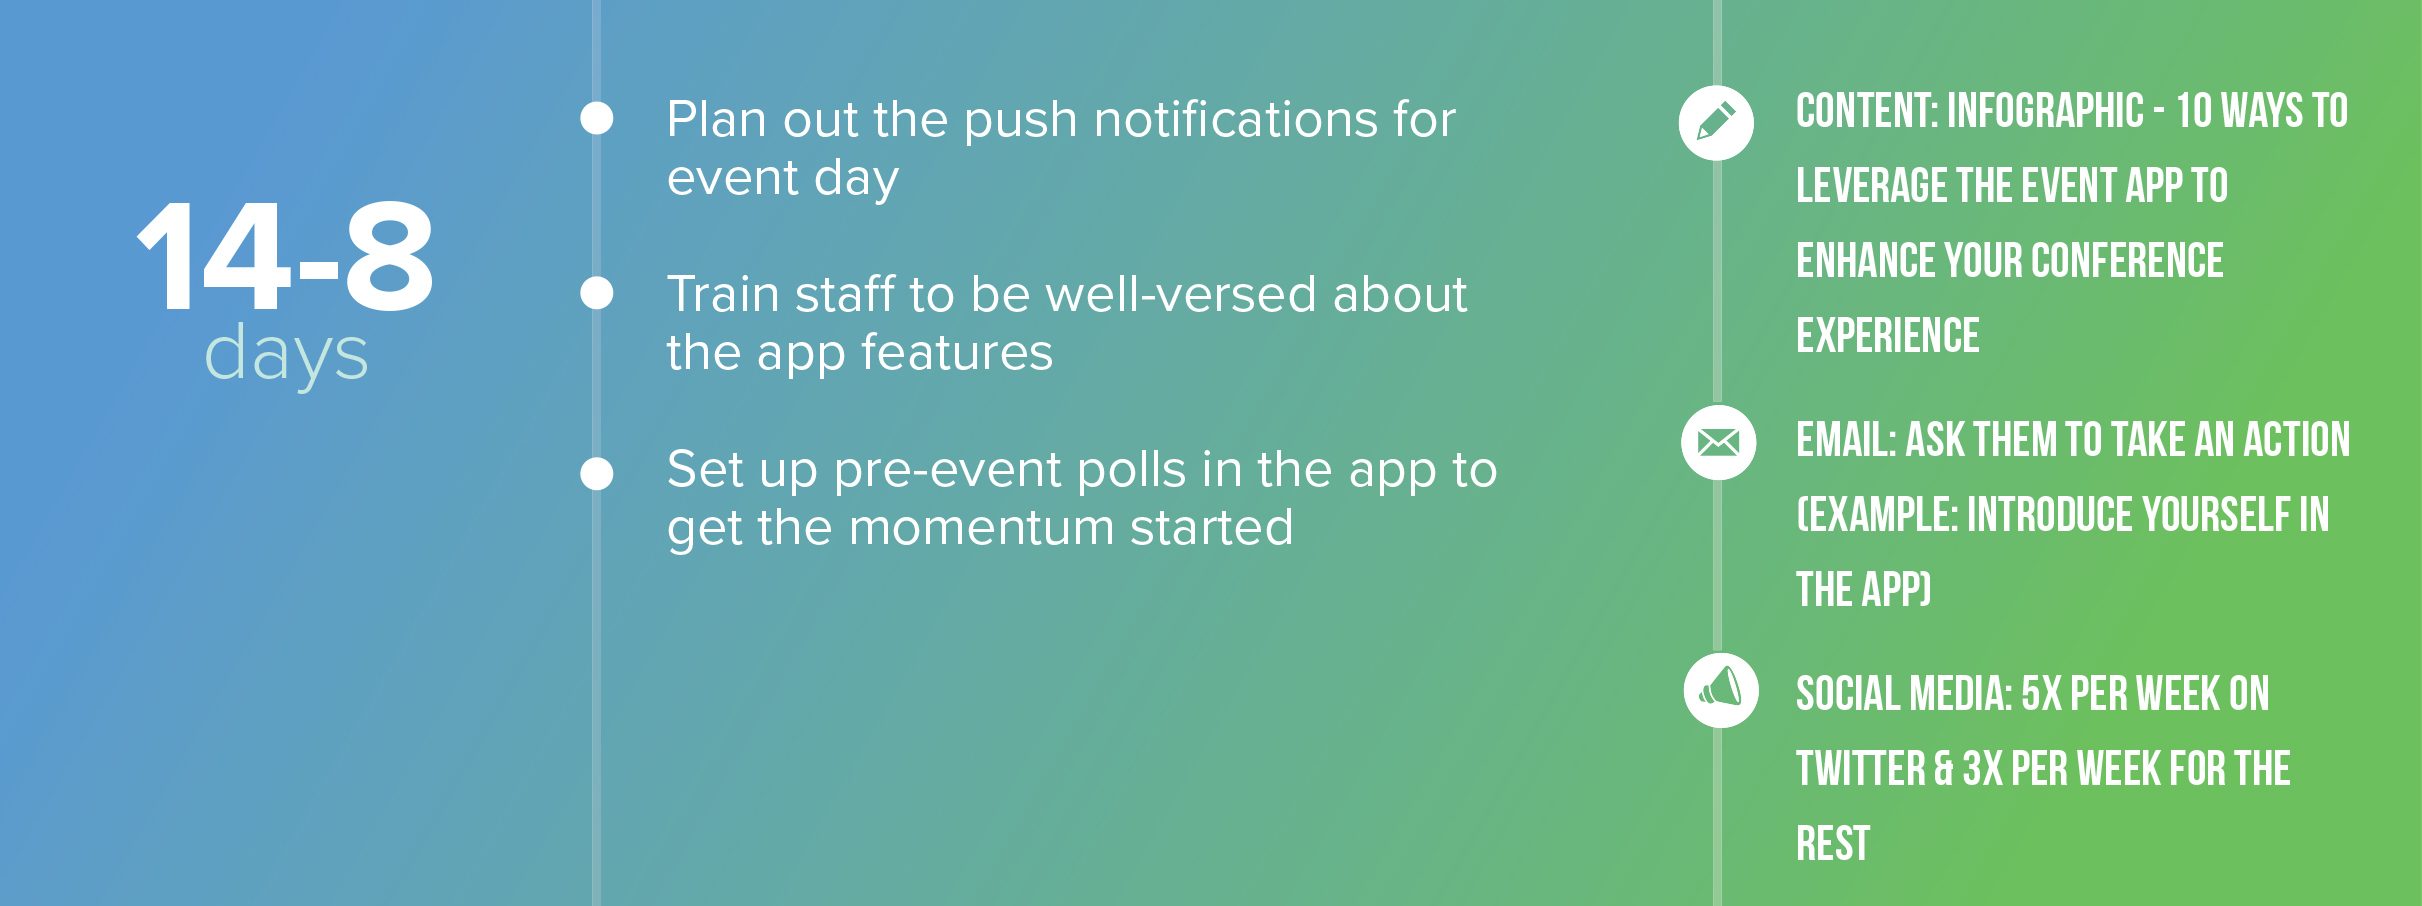 Event app marketing cheat sheet - 2 weeks before the event